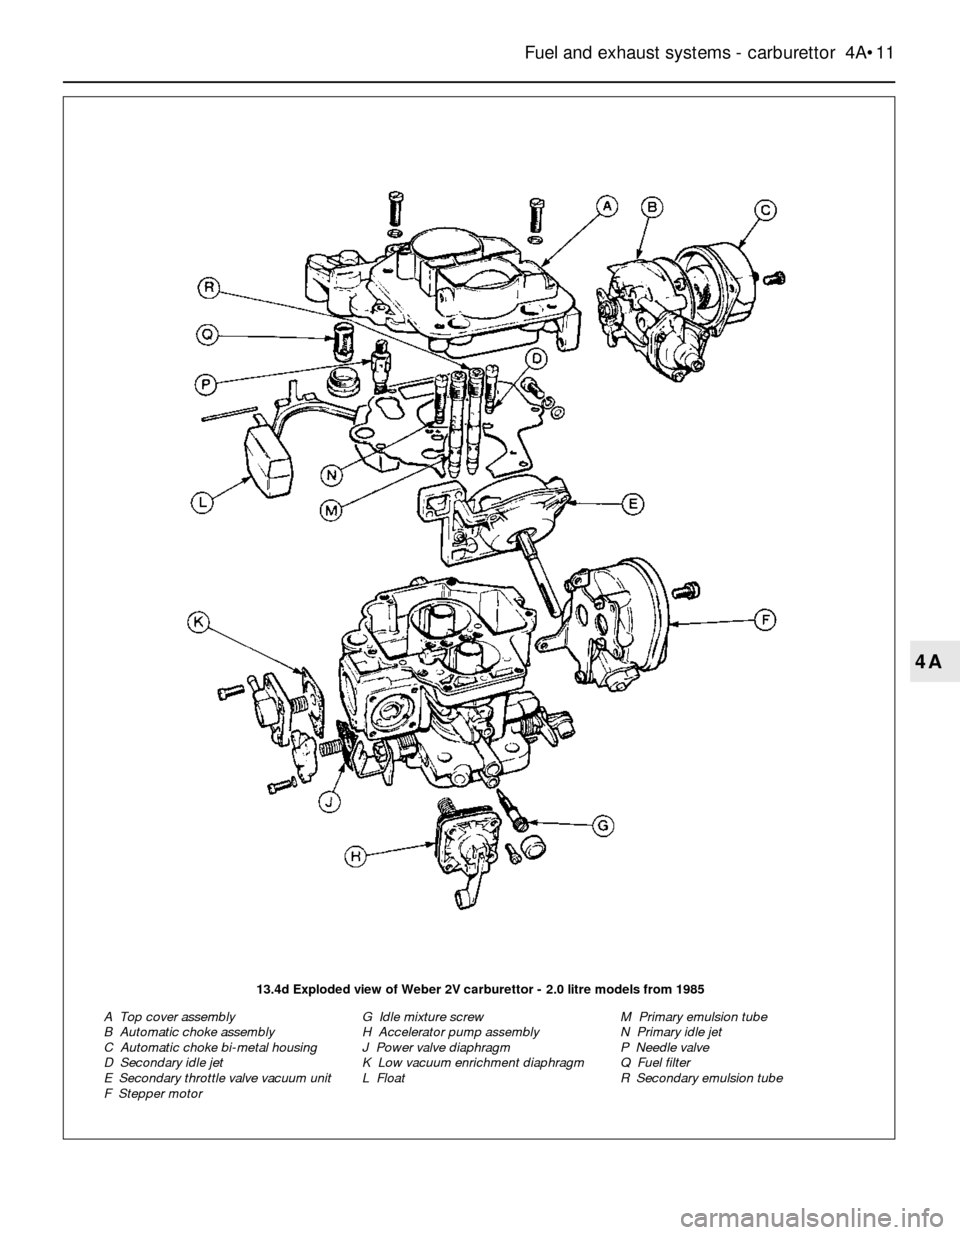 FORD SIERRA 1988 2.G Fuel And Exhaust Systems Carburettor Workshop Manual Fuel and exhaust systems - carburettor  4A•11
4A
13.4d Exploded view of Weber 2V carburettor - 2.0 litre models from 1985
A  Top cover assembly
B  Automatic choke assembly
C  Automatic choke bi-meta